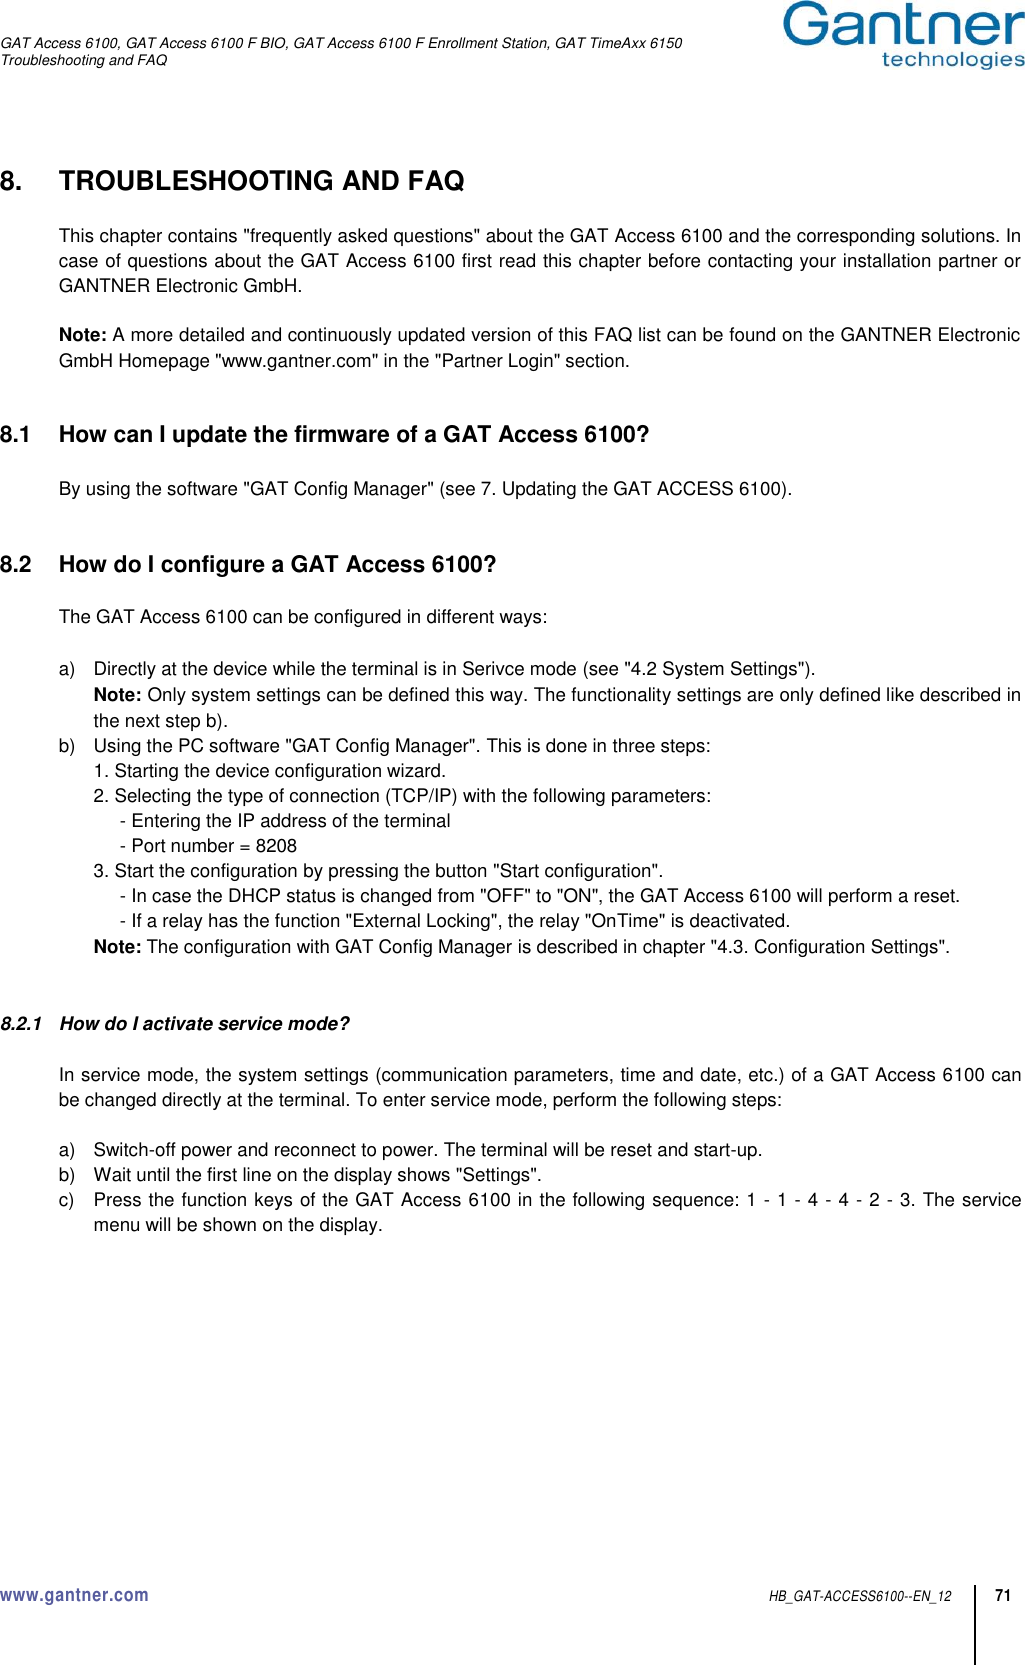 GAT Access 6100, GAT Access 6100 F BIO, GAT Access 6100 F Enrollment Station, GAT TimeAxx 6150 Troubleshooting and FAQ  www.gantner.com  HB_GAT-ACCESS6100--EN_12 71 8.  TROUBLESHOOTING AND FAQ  This chapter contains &quot;frequently asked questions&quot; about the GAT Access 6100 and the corresponding solutions. In case of questions about the GAT Access 6100 first read this chapter before contacting your installation partner or GANTNER Electronic GmbH.  Note: A more detailed and continuously updated version of this FAQ list can be found on the GANTNER Electronic GmbH Homepage &quot;www.gantner.com&quot; in the &quot;Partner Login&quot; section.   8.1  How can I update the firmware of a GAT Access 6100?  By using the software &quot;GAT Config Manager&quot; (see 7. Updating the GAT ACCESS 6100).   8.2  How do I configure a GAT Access 6100?  The GAT Access 6100 can be configured in different ways:  a)  Directly at the device while the terminal is in Serivce mode (see &quot;4.2 System Settings&quot;).   Note:  Only system settings can be defined this way. The functionality settings are only defined like described in the next step b). b)  Using the PC software &quot;GAT Config Manager&quot;. This is done in three steps:   1. Starting the device configuration wizard.   2. Selecting the type of connection (TCP/IP) with the following parameters:       - Entering the IP address of the terminal       - Port number = 8208   3. Start the configuration by pressing the button &quot;Start configuration&quot;.       - In case the DHCP status is changed from &quot;OFF&quot; to &quot;ON&quot;, the GAT Access 6100 will perform a reset.       - If a relay has the function &quot;External Locking&quot;, the relay &quot;OnTime&quot; is deactivated.   Note: The configuration with GAT Config Manager is described in chapter &quot;4.3. Configuration Settings&quot;.   8.2.1  How do I activate service mode?  In service mode, the system settings (communication parameters, time and date, etc.) of a GAT Access 6100 can be changed directly at the terminal. To enter service mode, perform the following steps:  a)  Switch-off power and reconnect to power. The terminal will be reset and start-up. b)  Wait until the first line on the display shows &quot;Settings&quot;. c)  Press the function keys of the GAT Access 6100 in the following sequence: 1 - 1 - 4 - 4 - 2 - 3. The service menu will be shown on the display. 